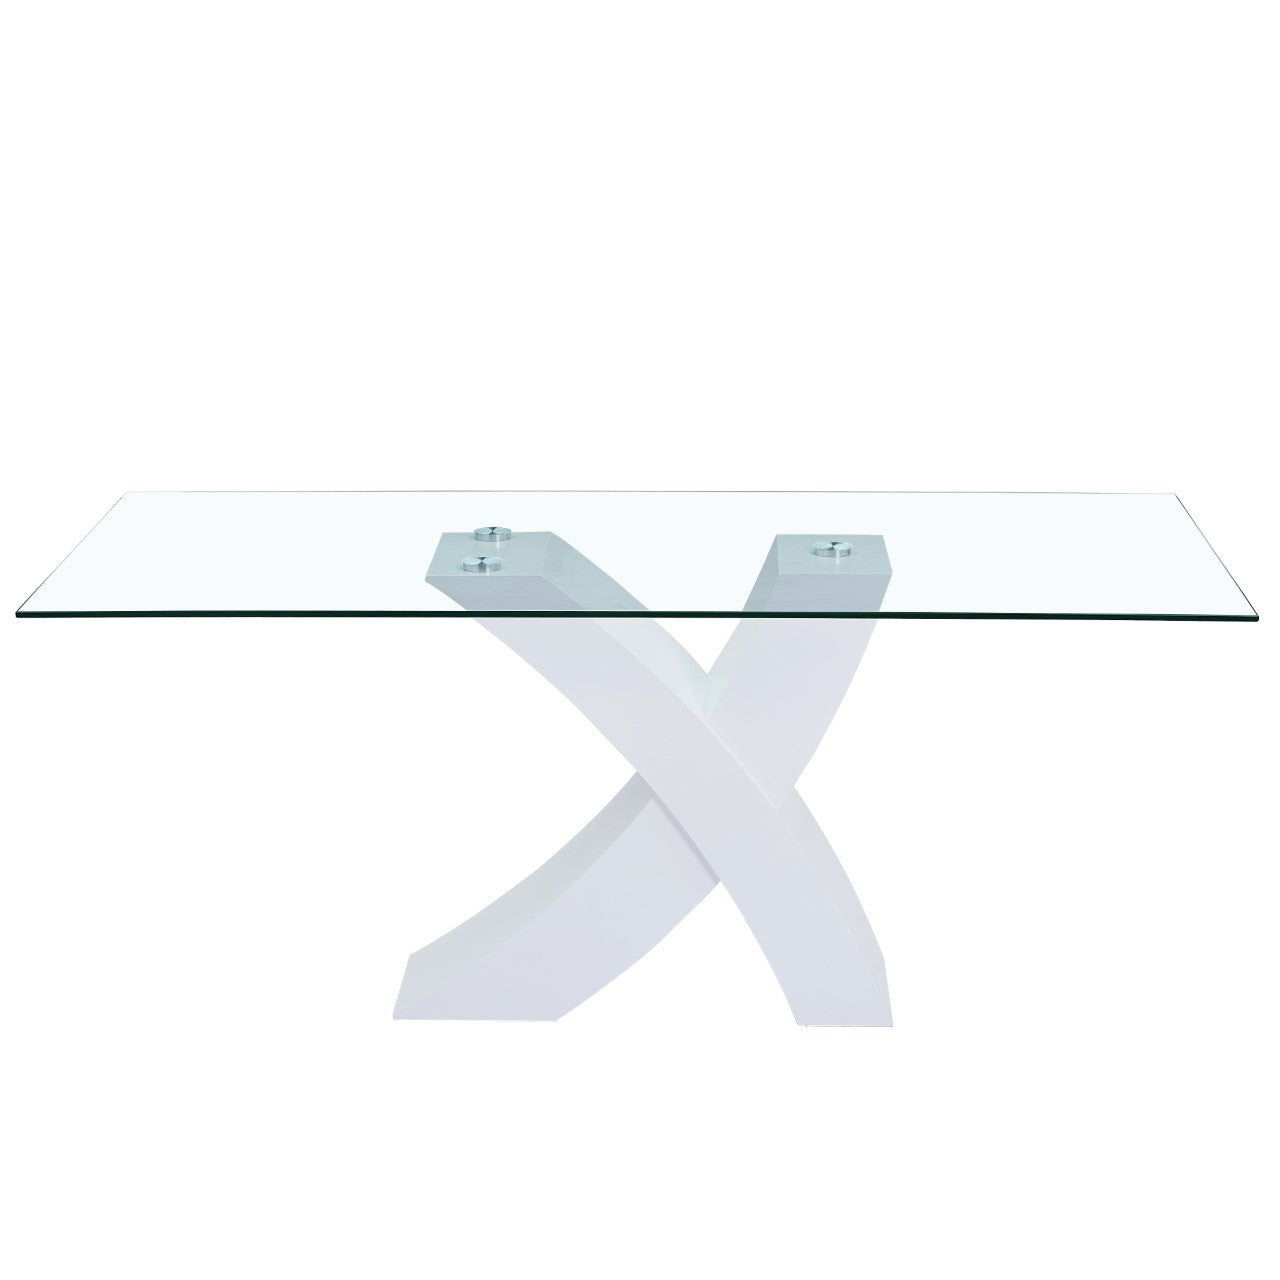 DT-KL04 PERVIS Dining Table